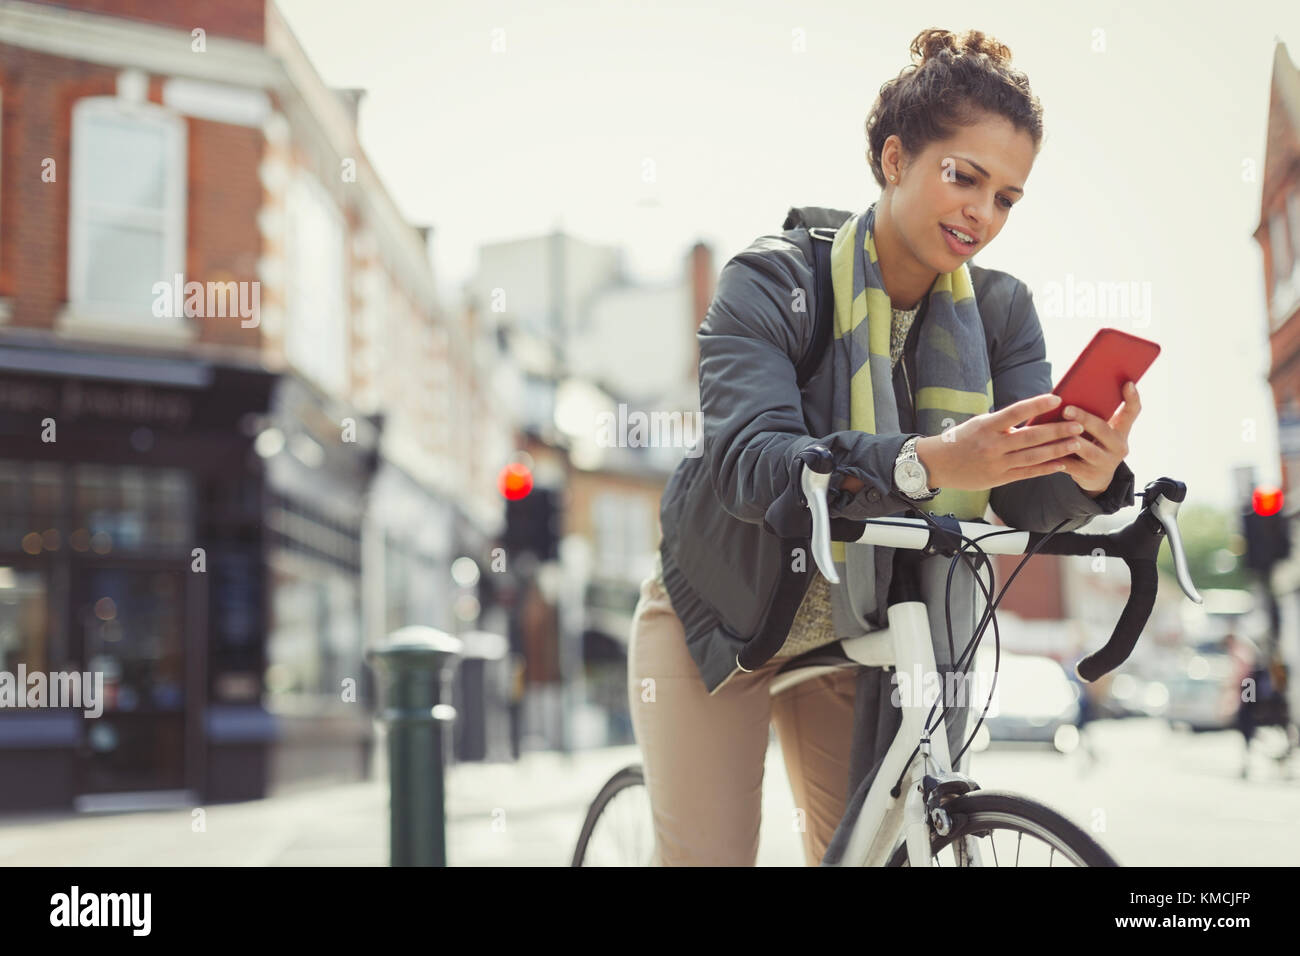 Young woman texting with cell phone, commuting on bicycle on urban street Stock Photo